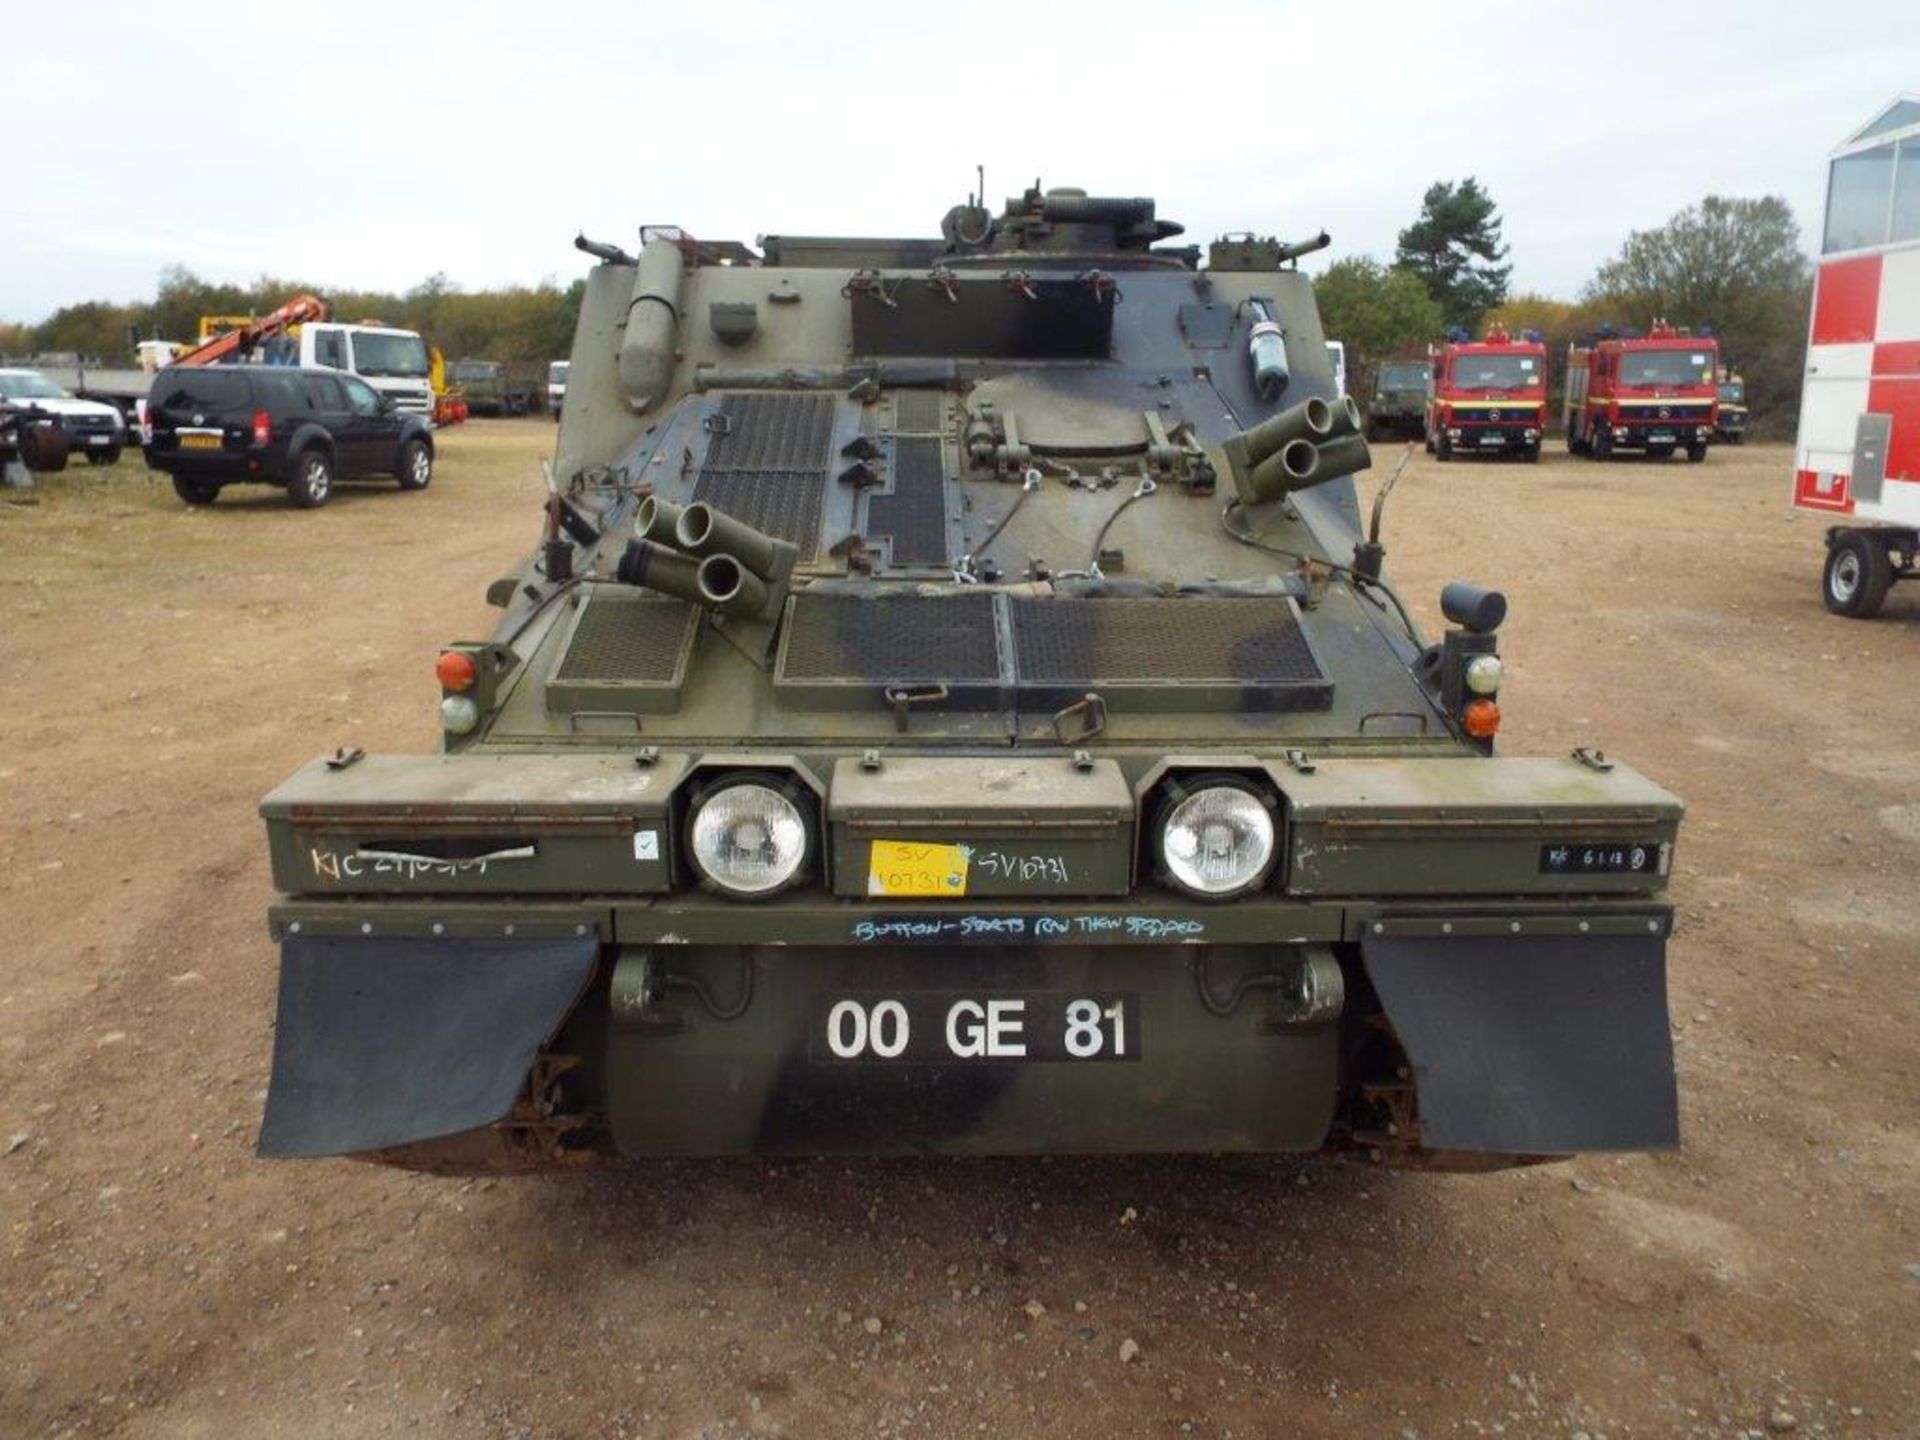 CVRT (Combat Vehicle Reconnaissance Tracked) FV105 Sultan Armoured Personnel Carrier - Image 2 of 30